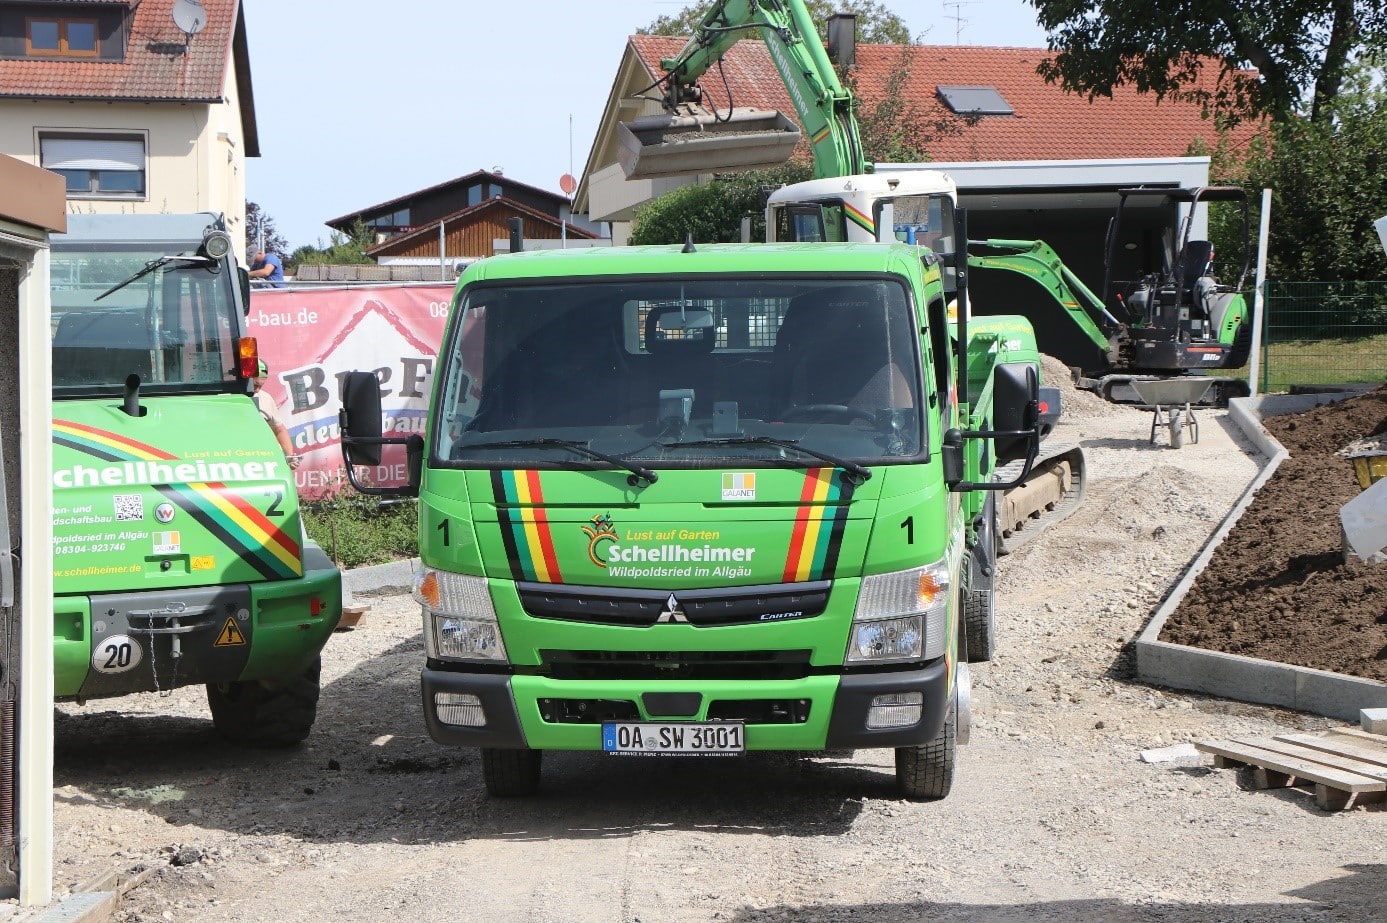 Schellheimer Garden- and Landscaping GmbH turns its customers' garden dreams into reality. For transport tasks, the landscaping professionals rely on the fuso canter.